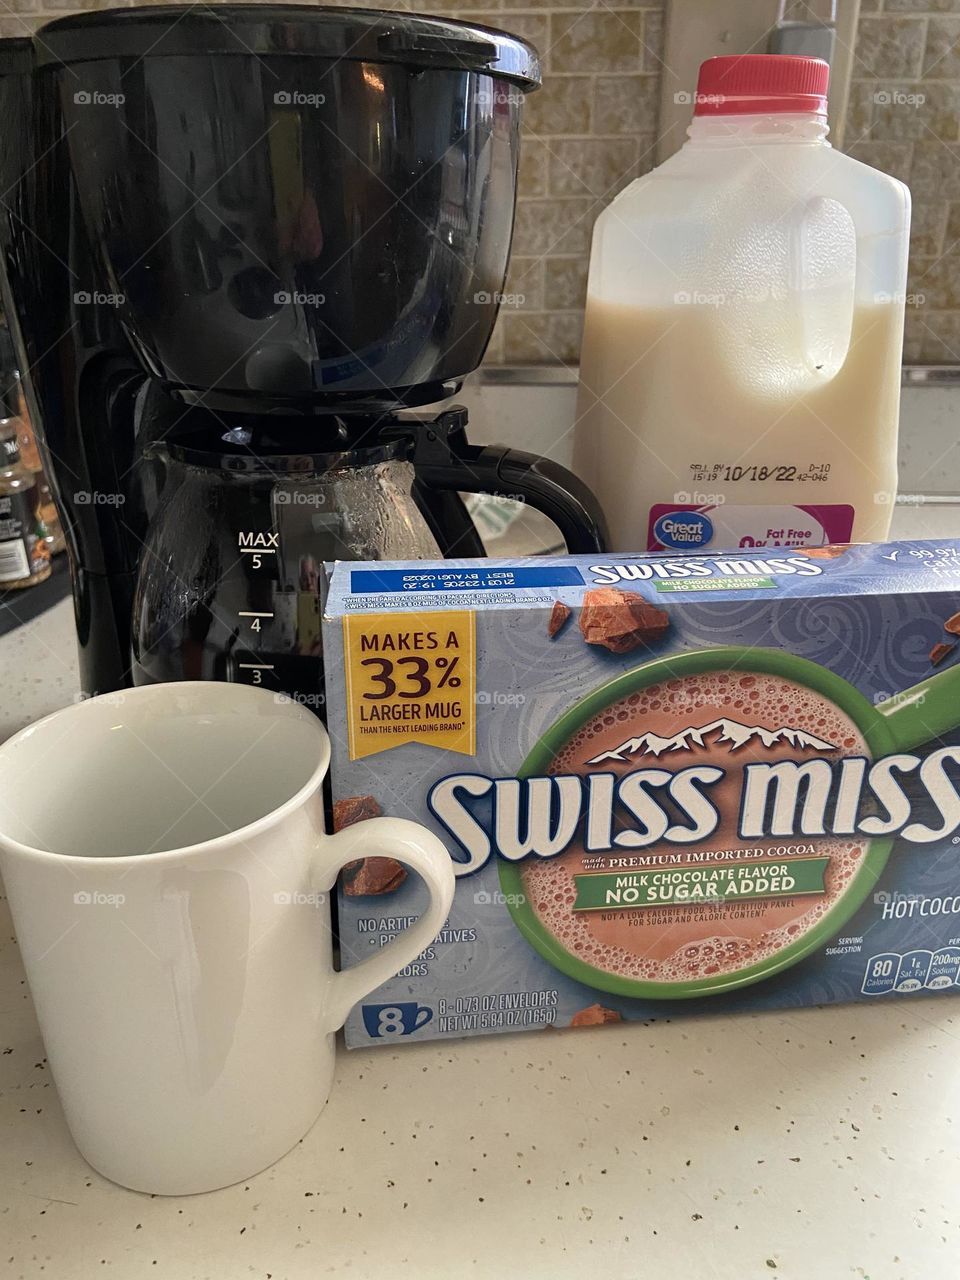 The ingredients for my own homemade version of a mocha:coffee, Swiss Miss hot cocoa mix (any flavor) and milk. I put the cocoa powder in a mug, fill about 3/4 with coffee, add a splash of milk and stir. It’s a delicious treat on a Sunday morning. 